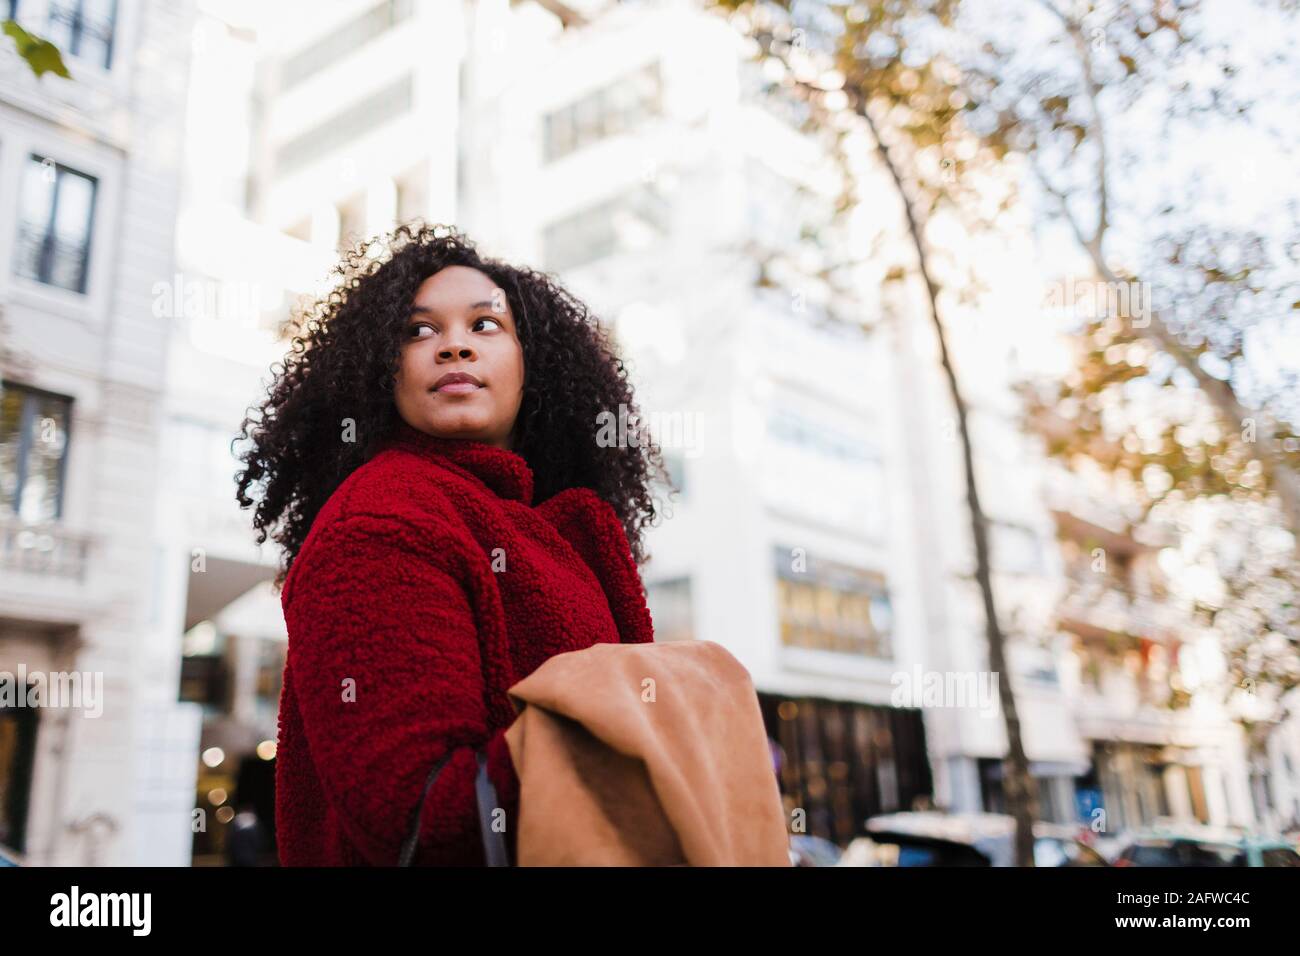 Young woman looking over shoulder on urban street Stock Photo